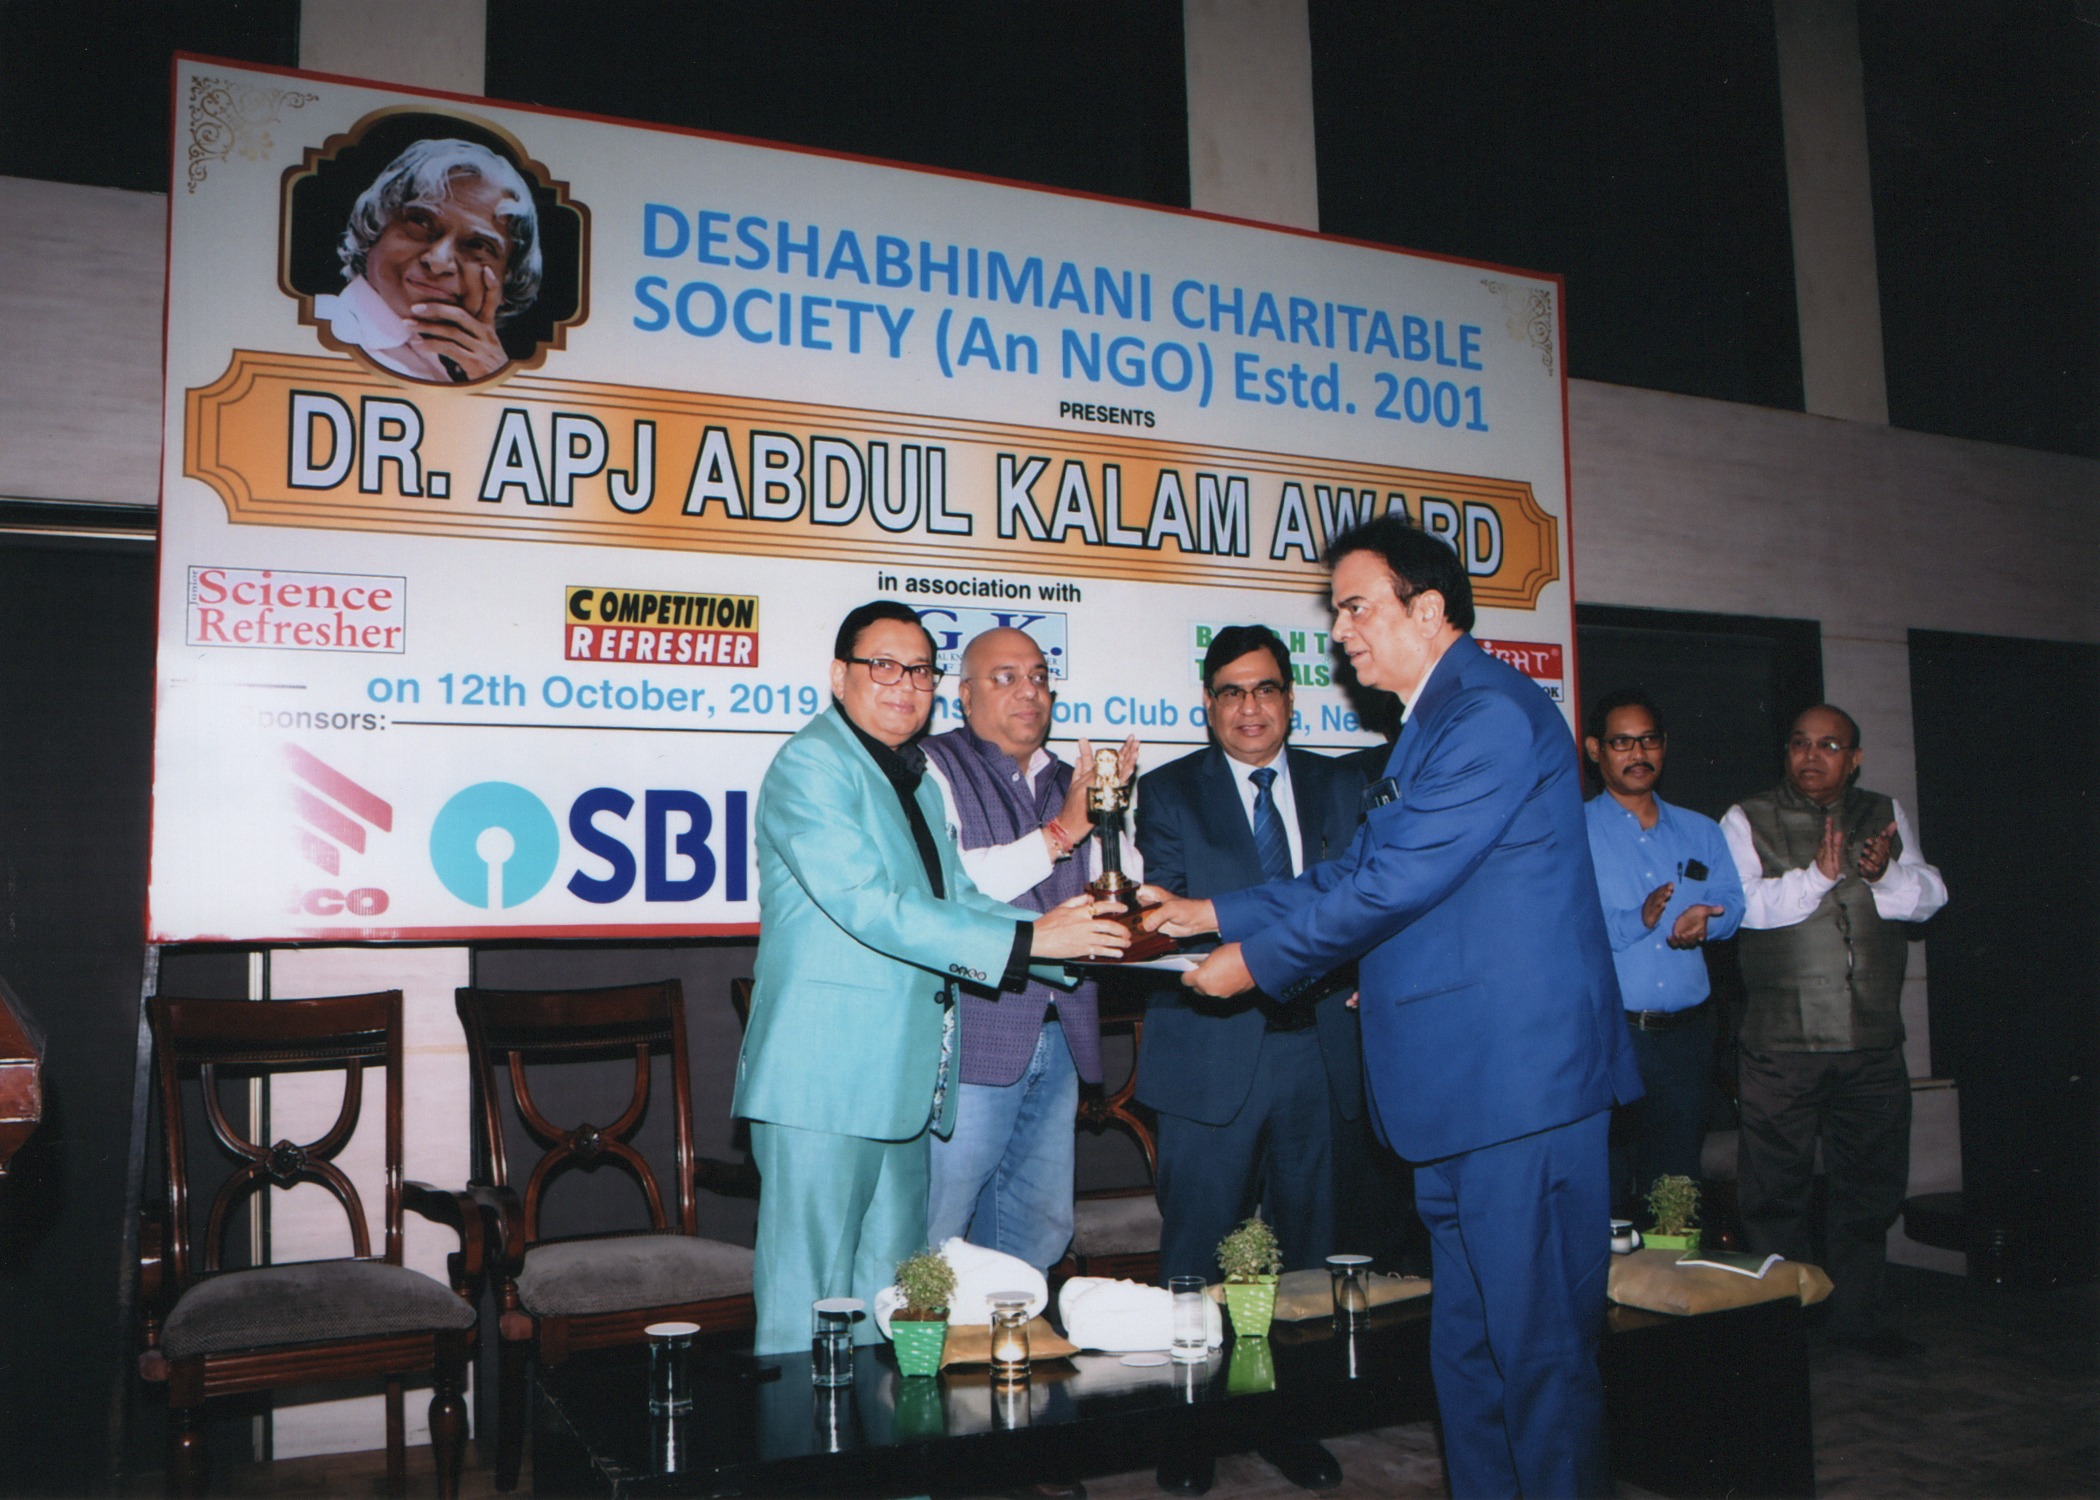 J C Chaudhry while taking the Dr. APJ Abdul Kalam Award for Excellence